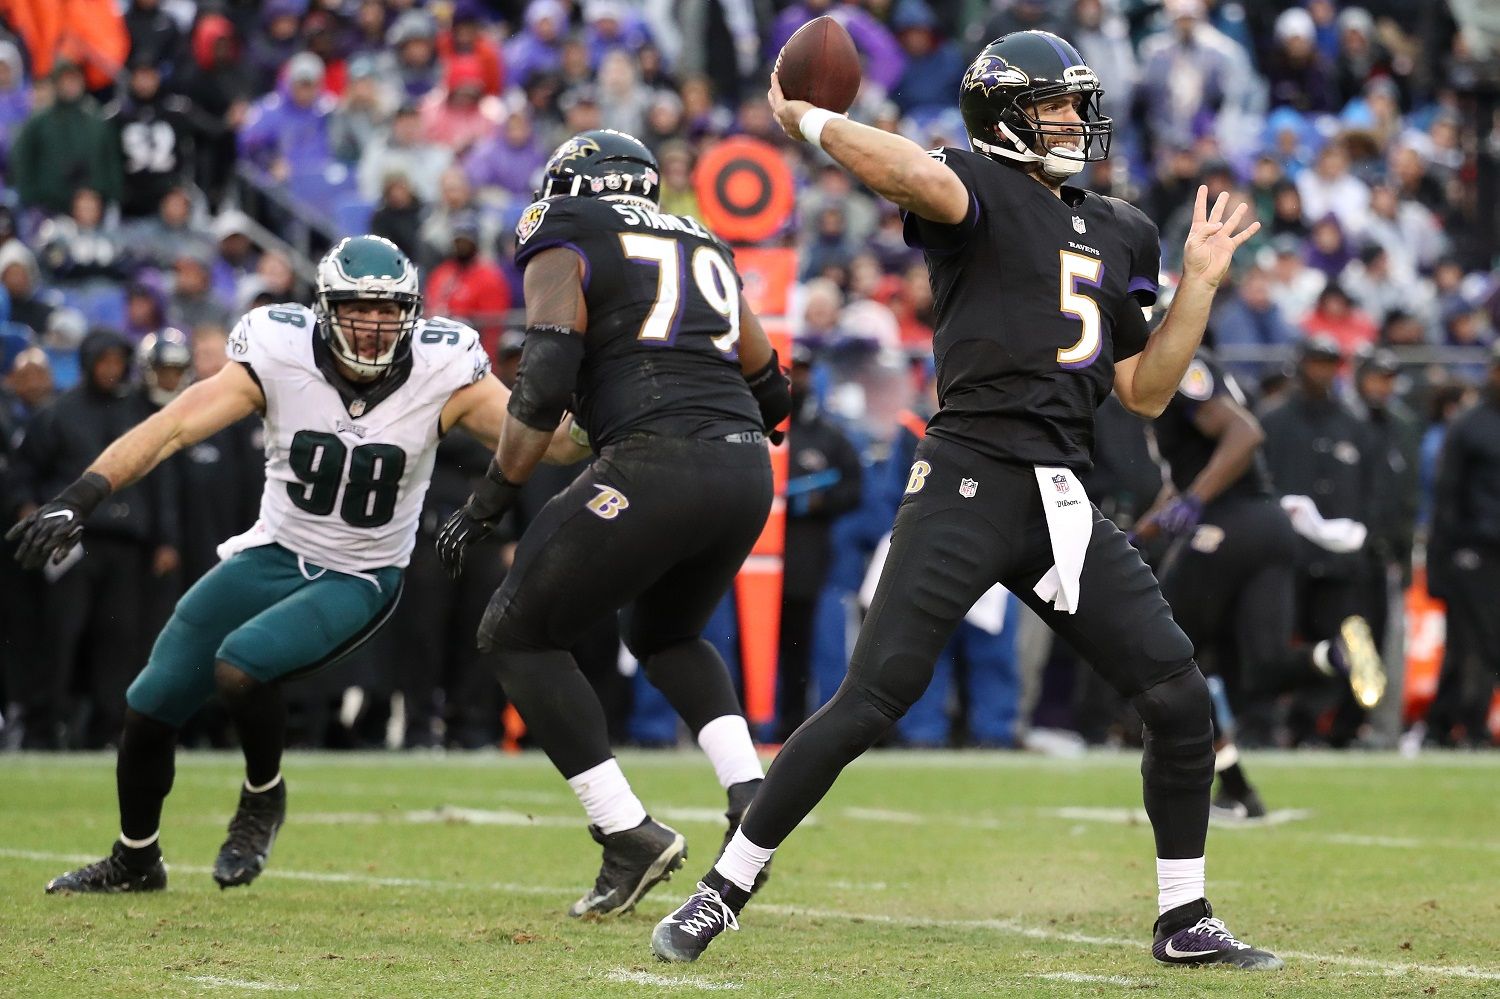 BALTIMORE, MD - DECEMBER 18: Quarterback Joe Flacco #5 of the Baltimore Ravens passes the ball while teammate offensive tackle Ronnie Stanley #79 blocks against defensive end Connor Barwin #98 of the Philadelphia Eagles in the second quarter at M&amp;T Bank Stadium on December 18, 2016 in Baltimore, Maryland. (Photo by Rob Carr/Getty Images)